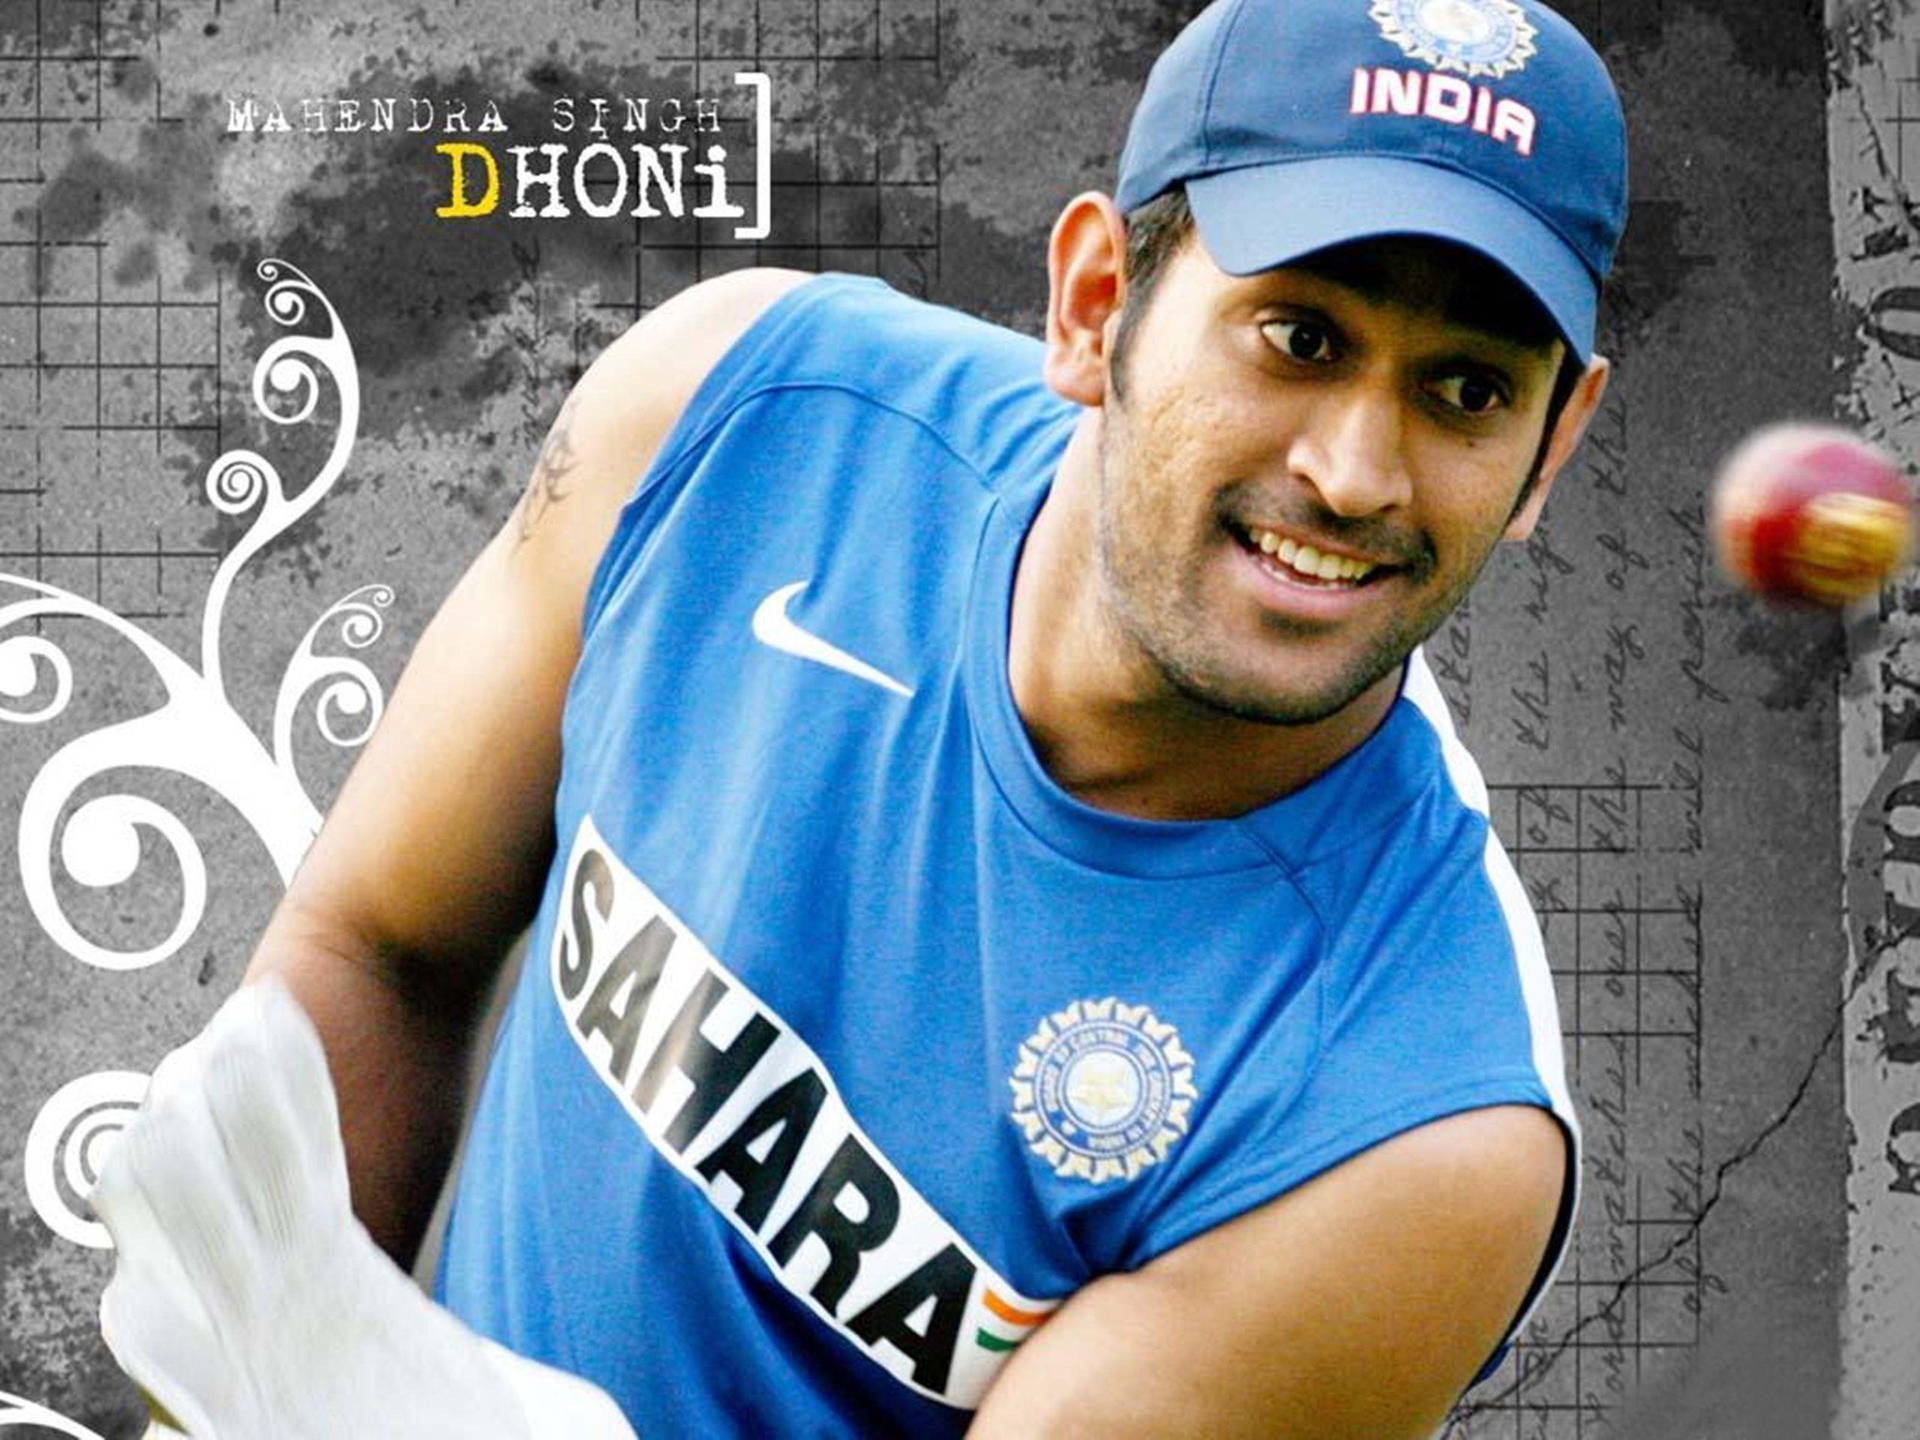 Free Ms Dhoni Wallpaper Downloads, [100+] Ms Dhoni Wallpapers for FREE |  